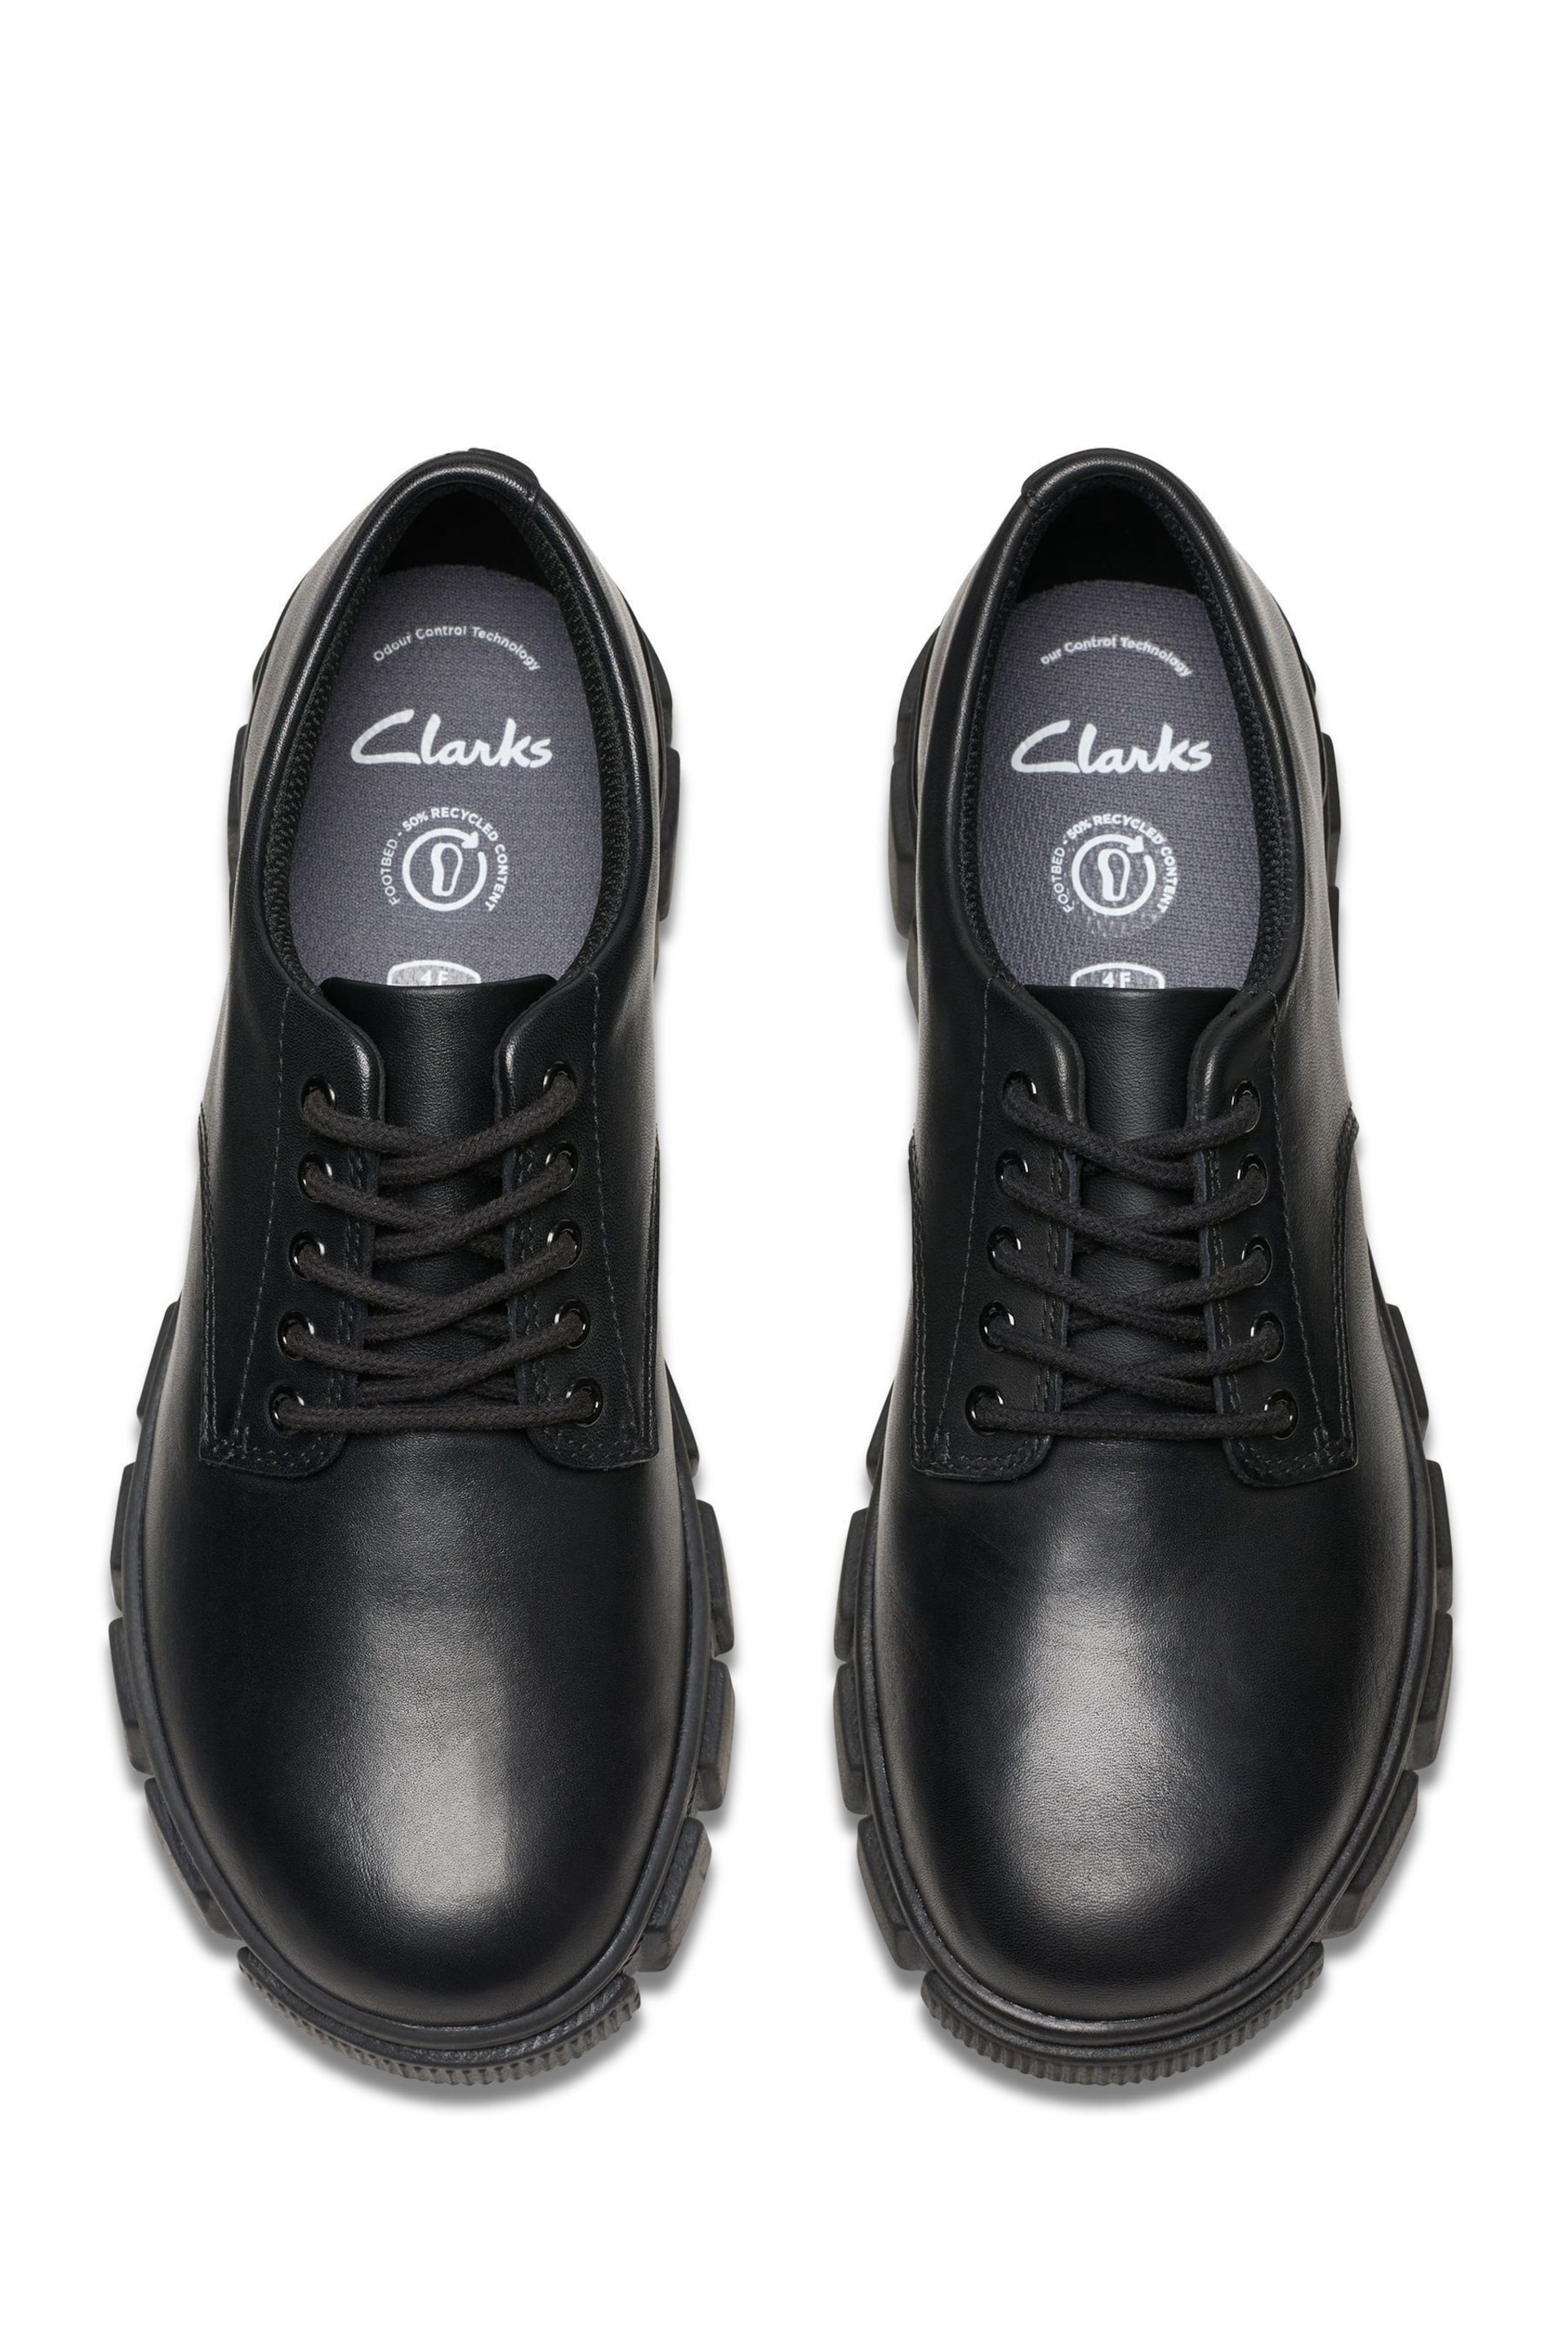 Clarks Black Leather Evyn Lace Y Shoes - Image 5 of 7